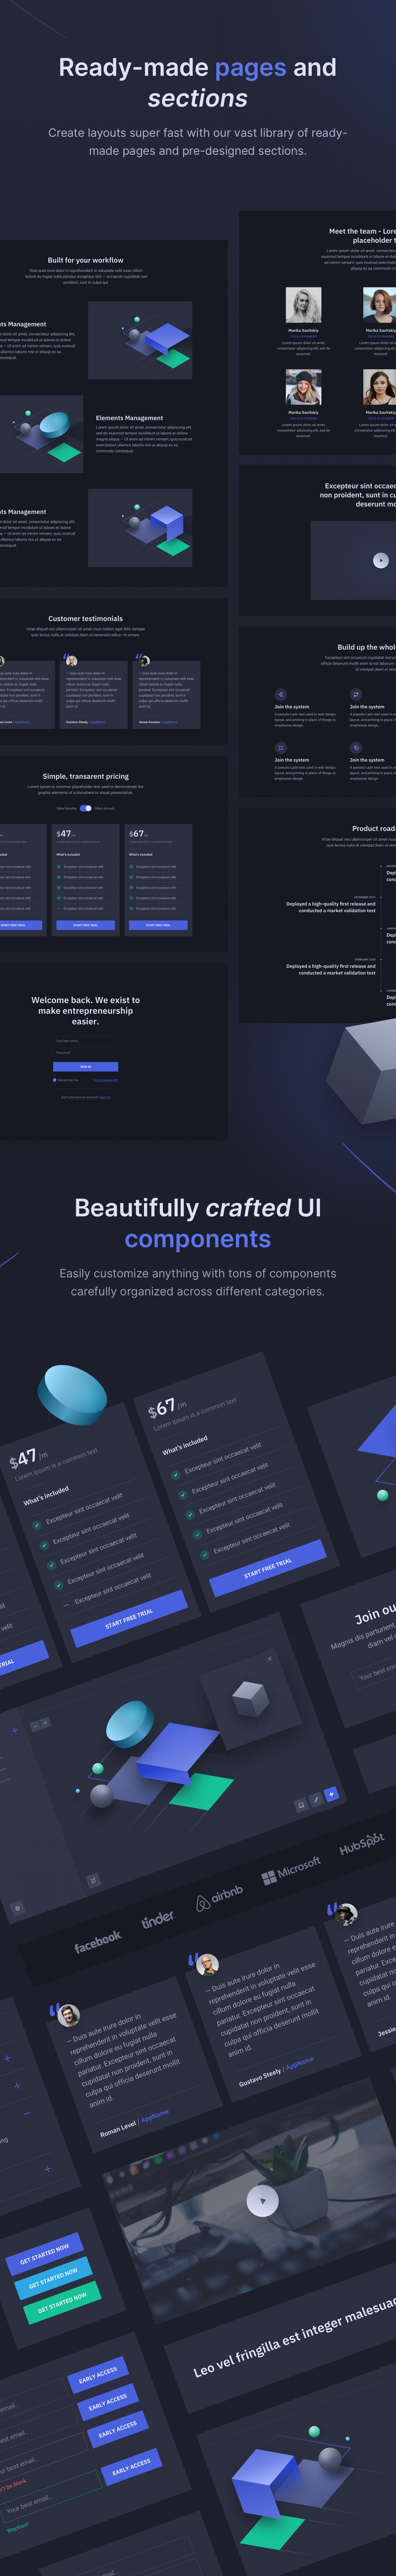 Cube - HTML Landing Page Template for Startups - 3